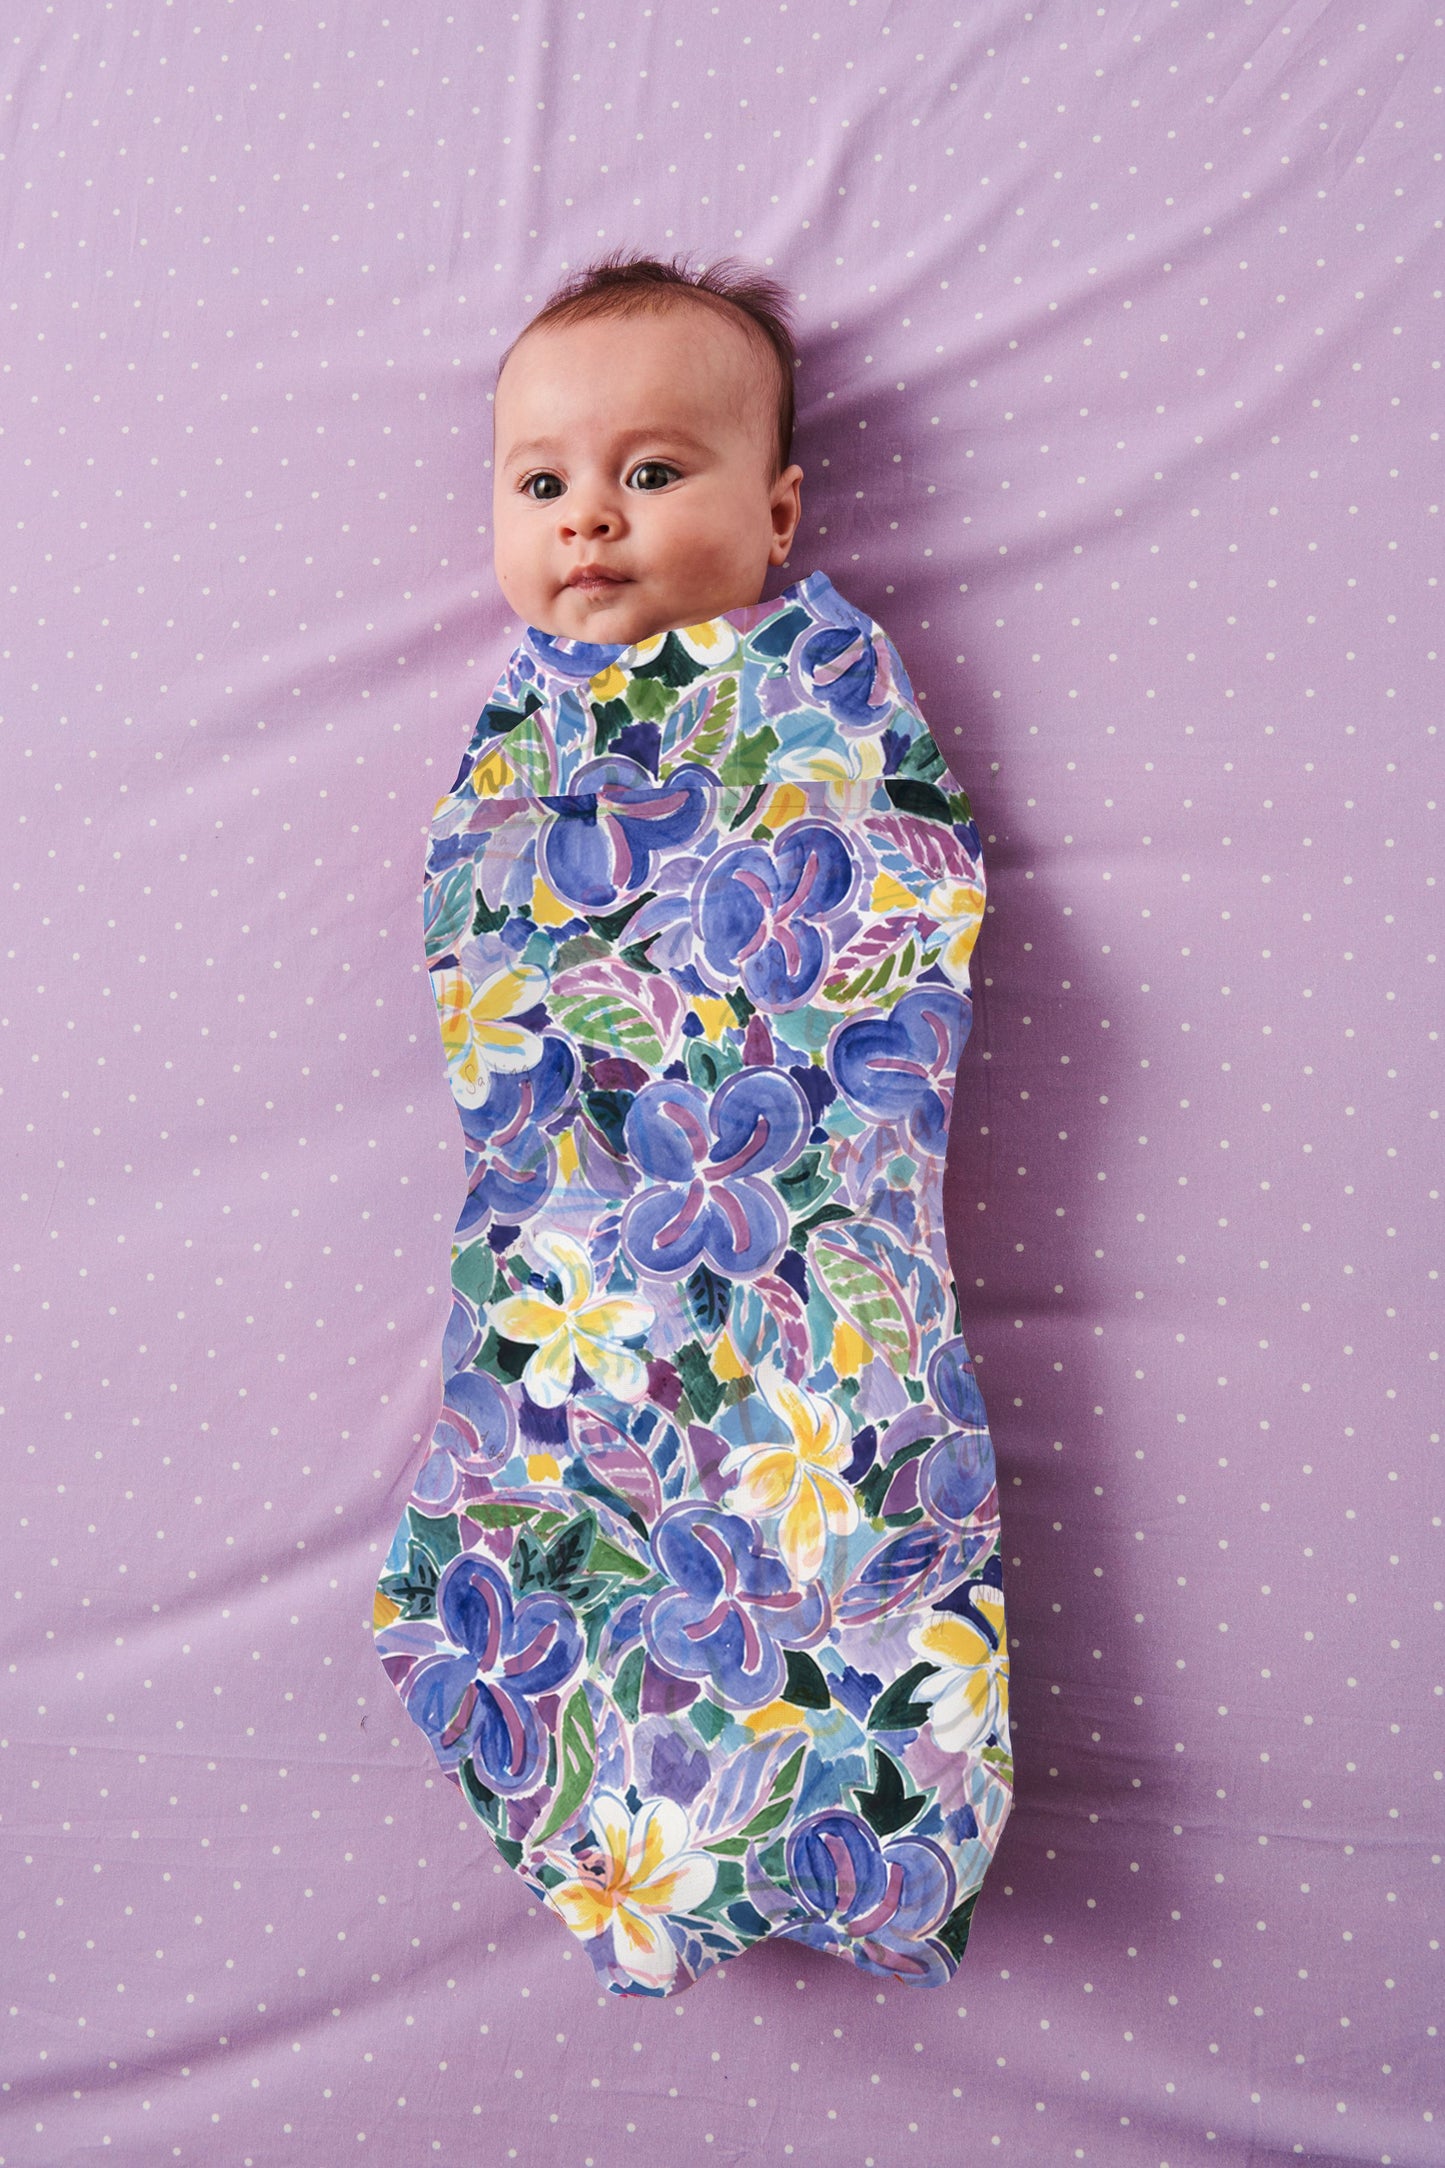  Kip&Co X Ken Done Frangipani Bamboo Swaddle features a painterly floral print with frangipanis and blossoming blue and purple blooms. The ultimate multi use baby item, our super soft bamboo swaddles make for the perfect new baby gift. They keep our precious bundles snug and warm, and are suitable as lightweight pram covers, comforter blankets, and an easy extra layer when on the go.